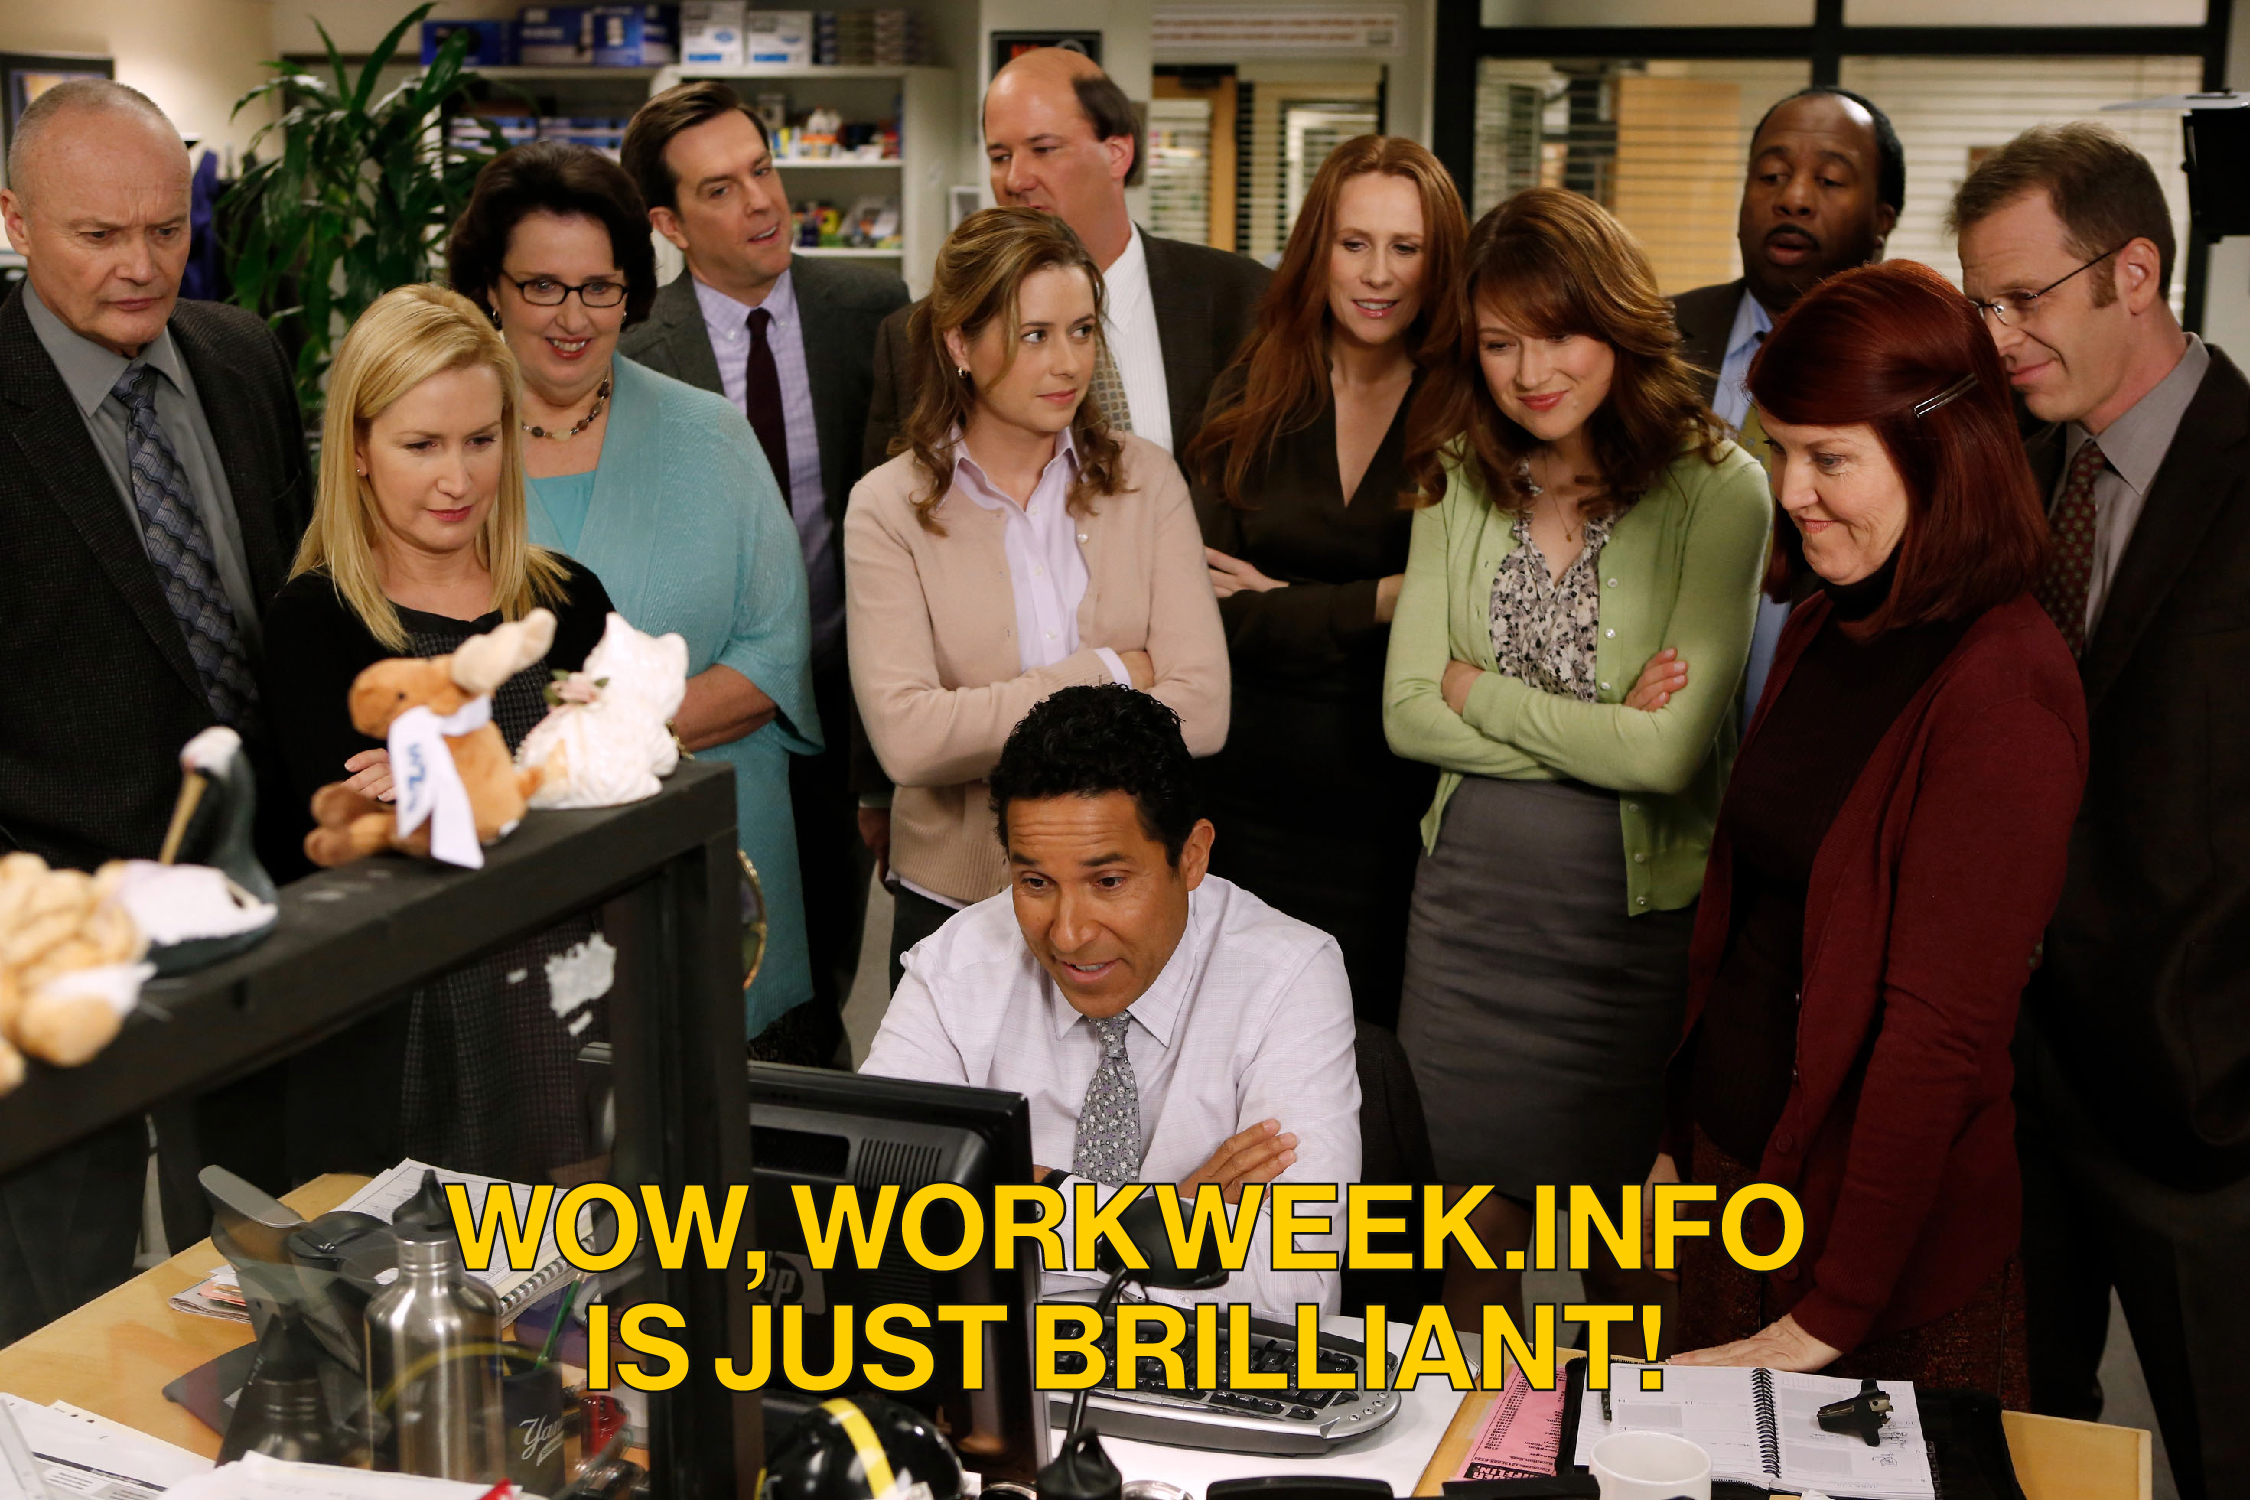 Gabe Ferreira: Work Week — “The Office” promotional poster.